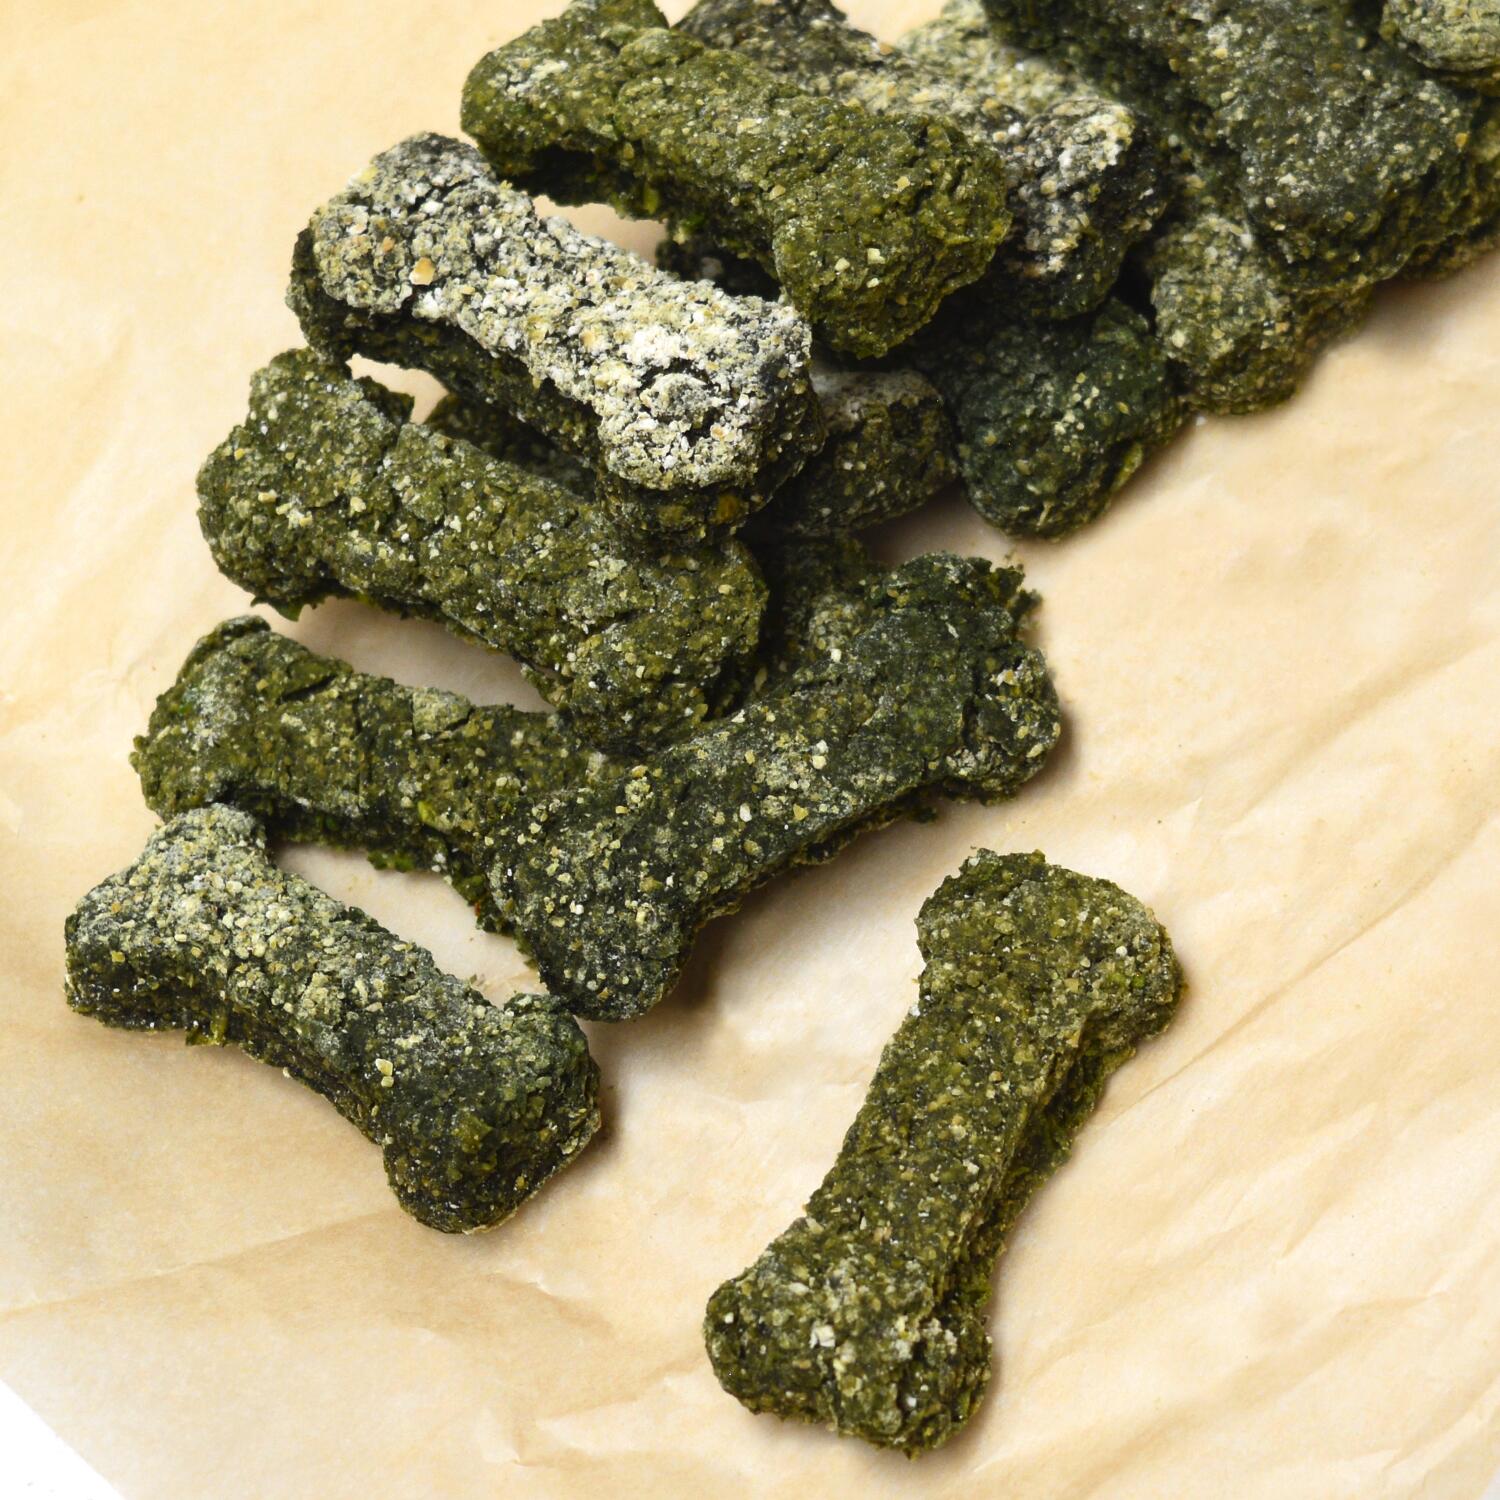 Booster Small Pea, Peanut Butter and Spirulina vegan bone shaped dog biscuits on brown parchment paper